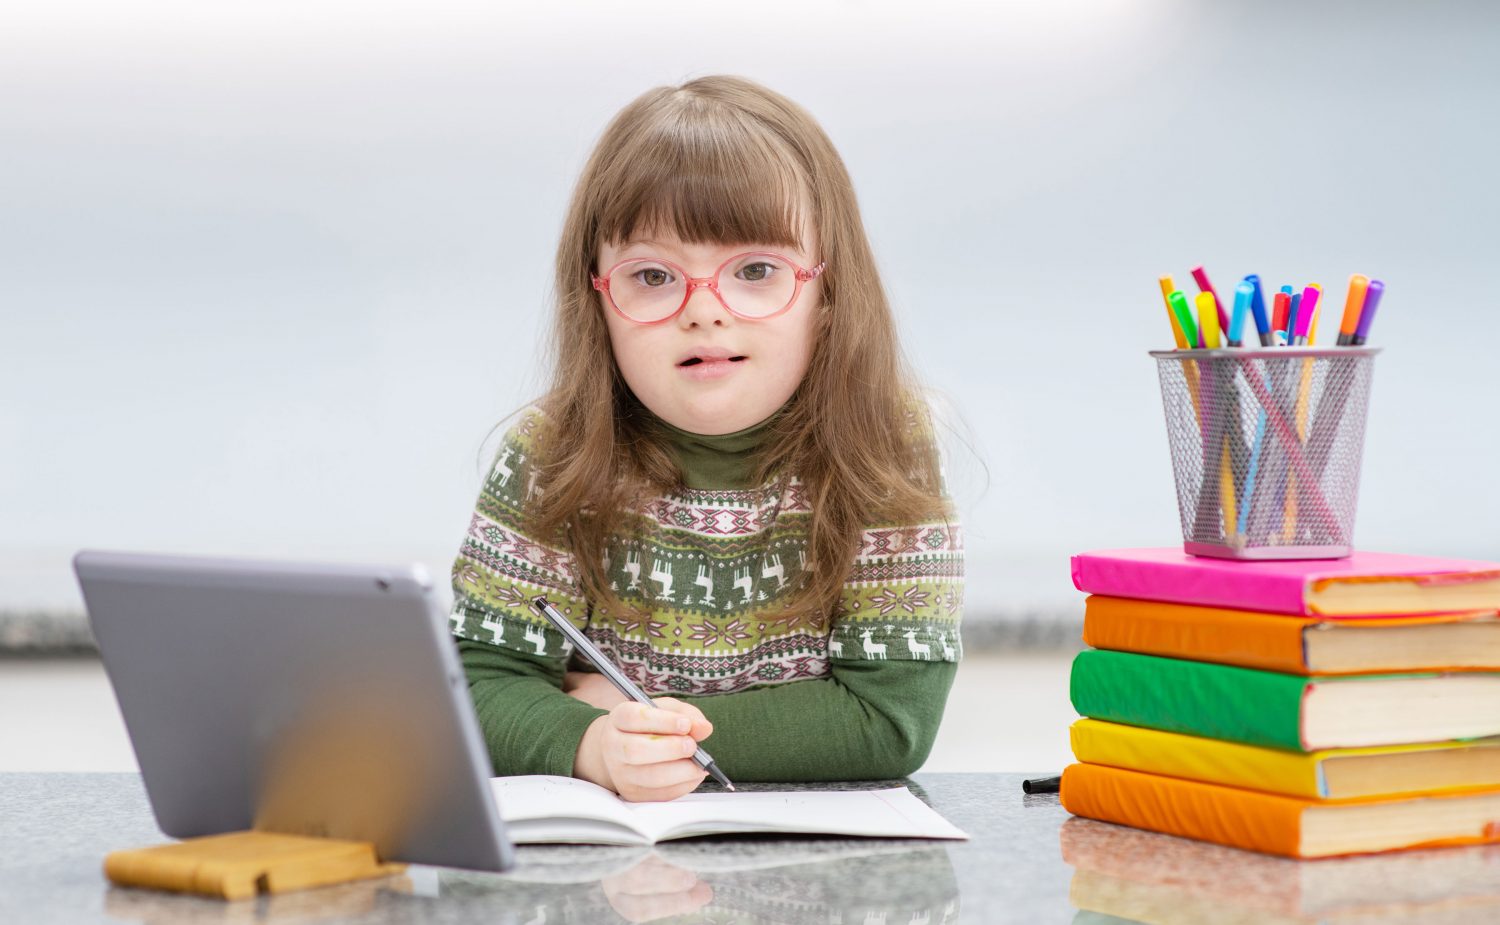 Young girl with Down syndrome does school work with tablet